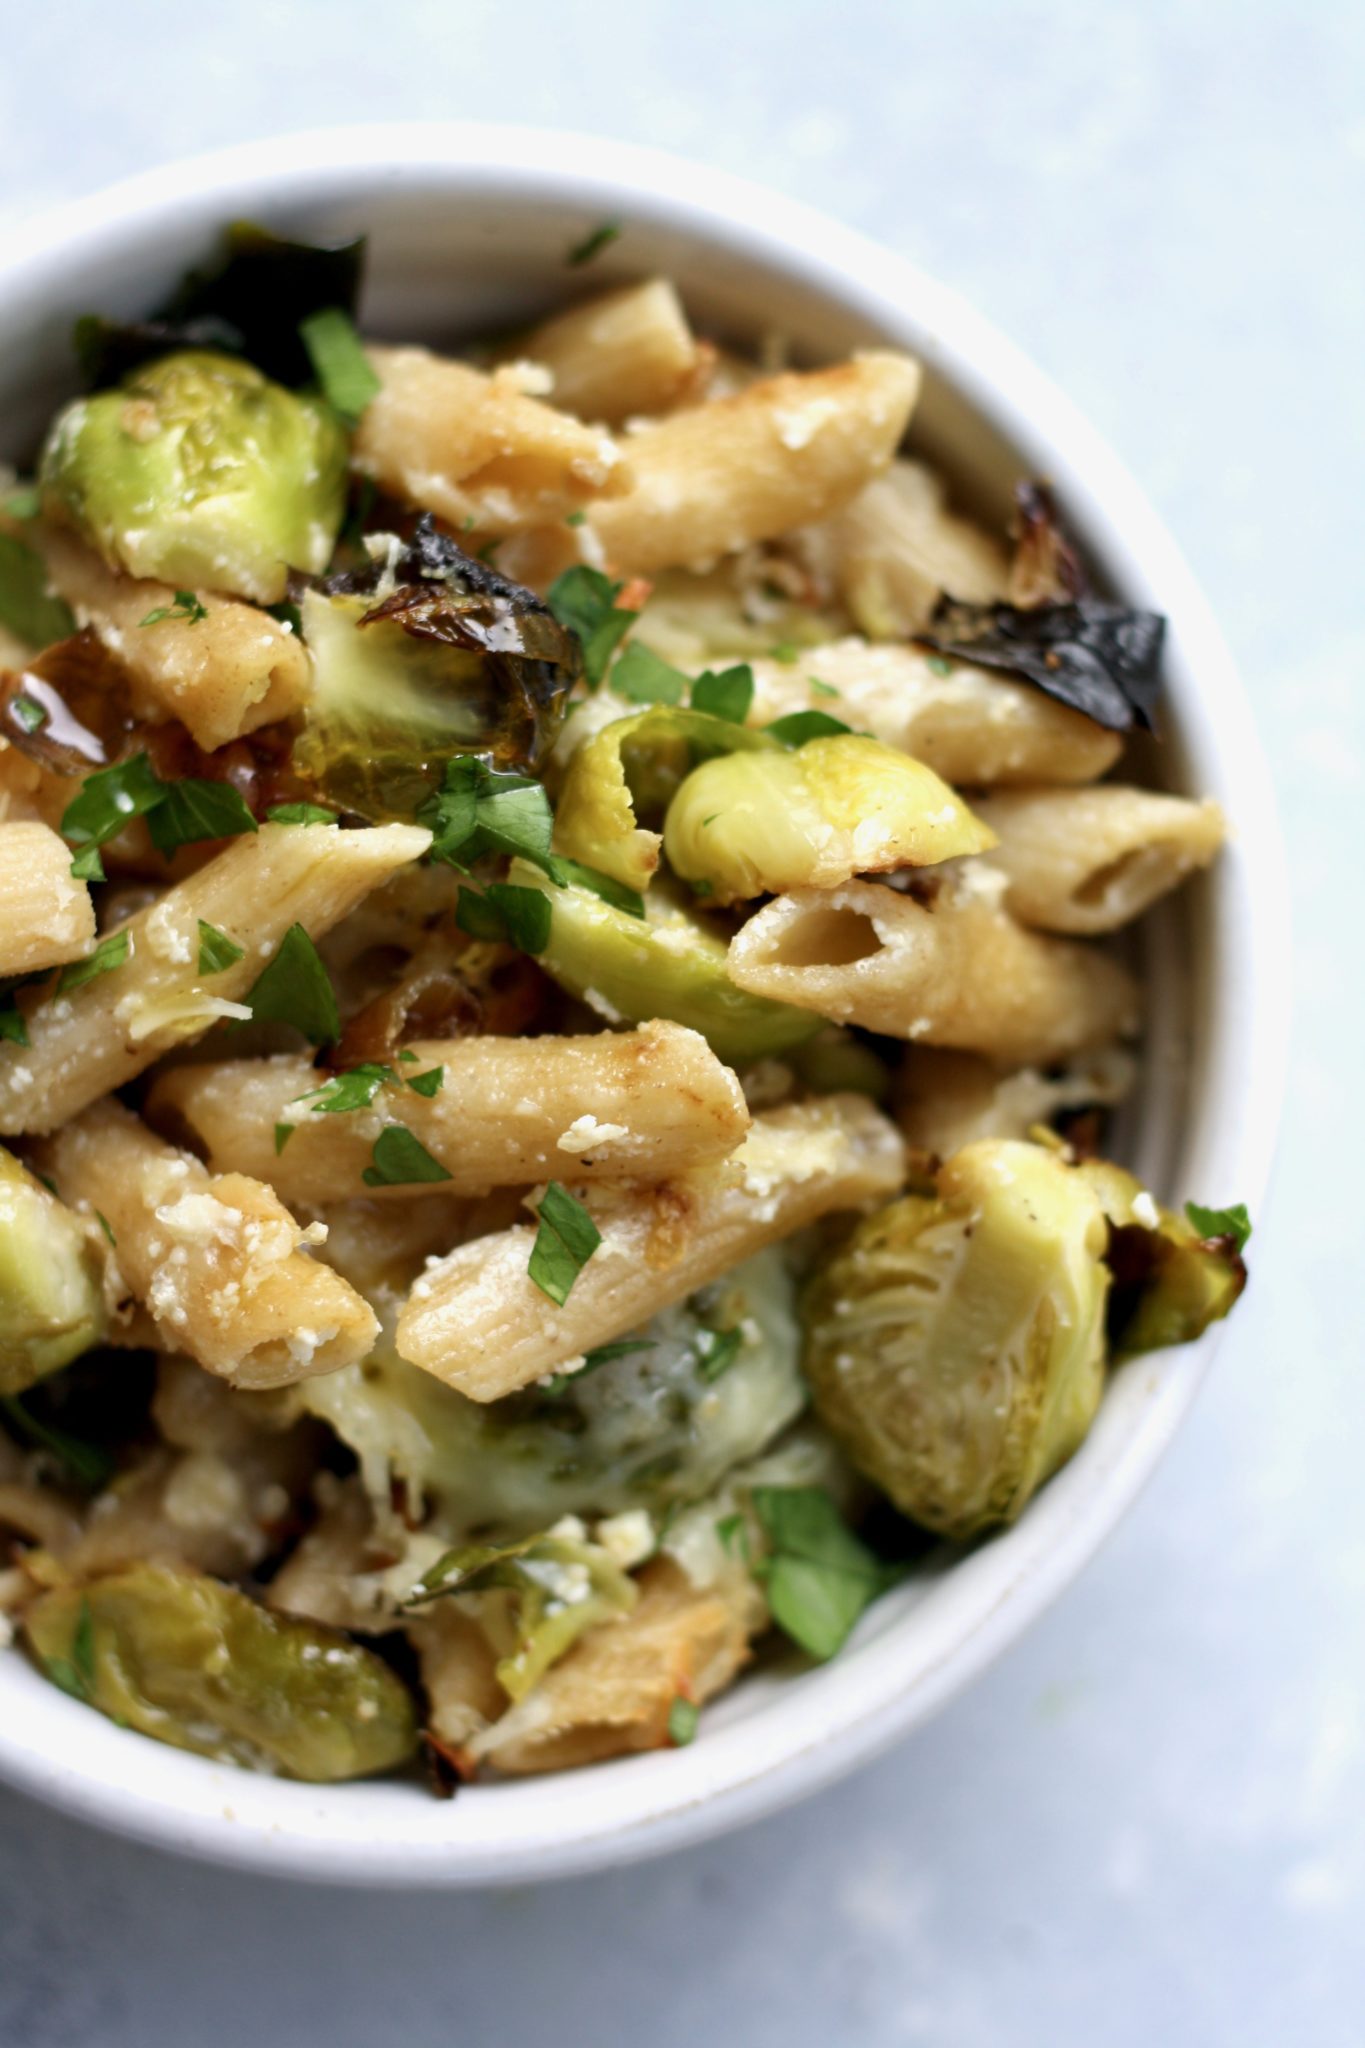 roasted brussel sprout & caramelized onion whole wheat pasta bake // cait's plate